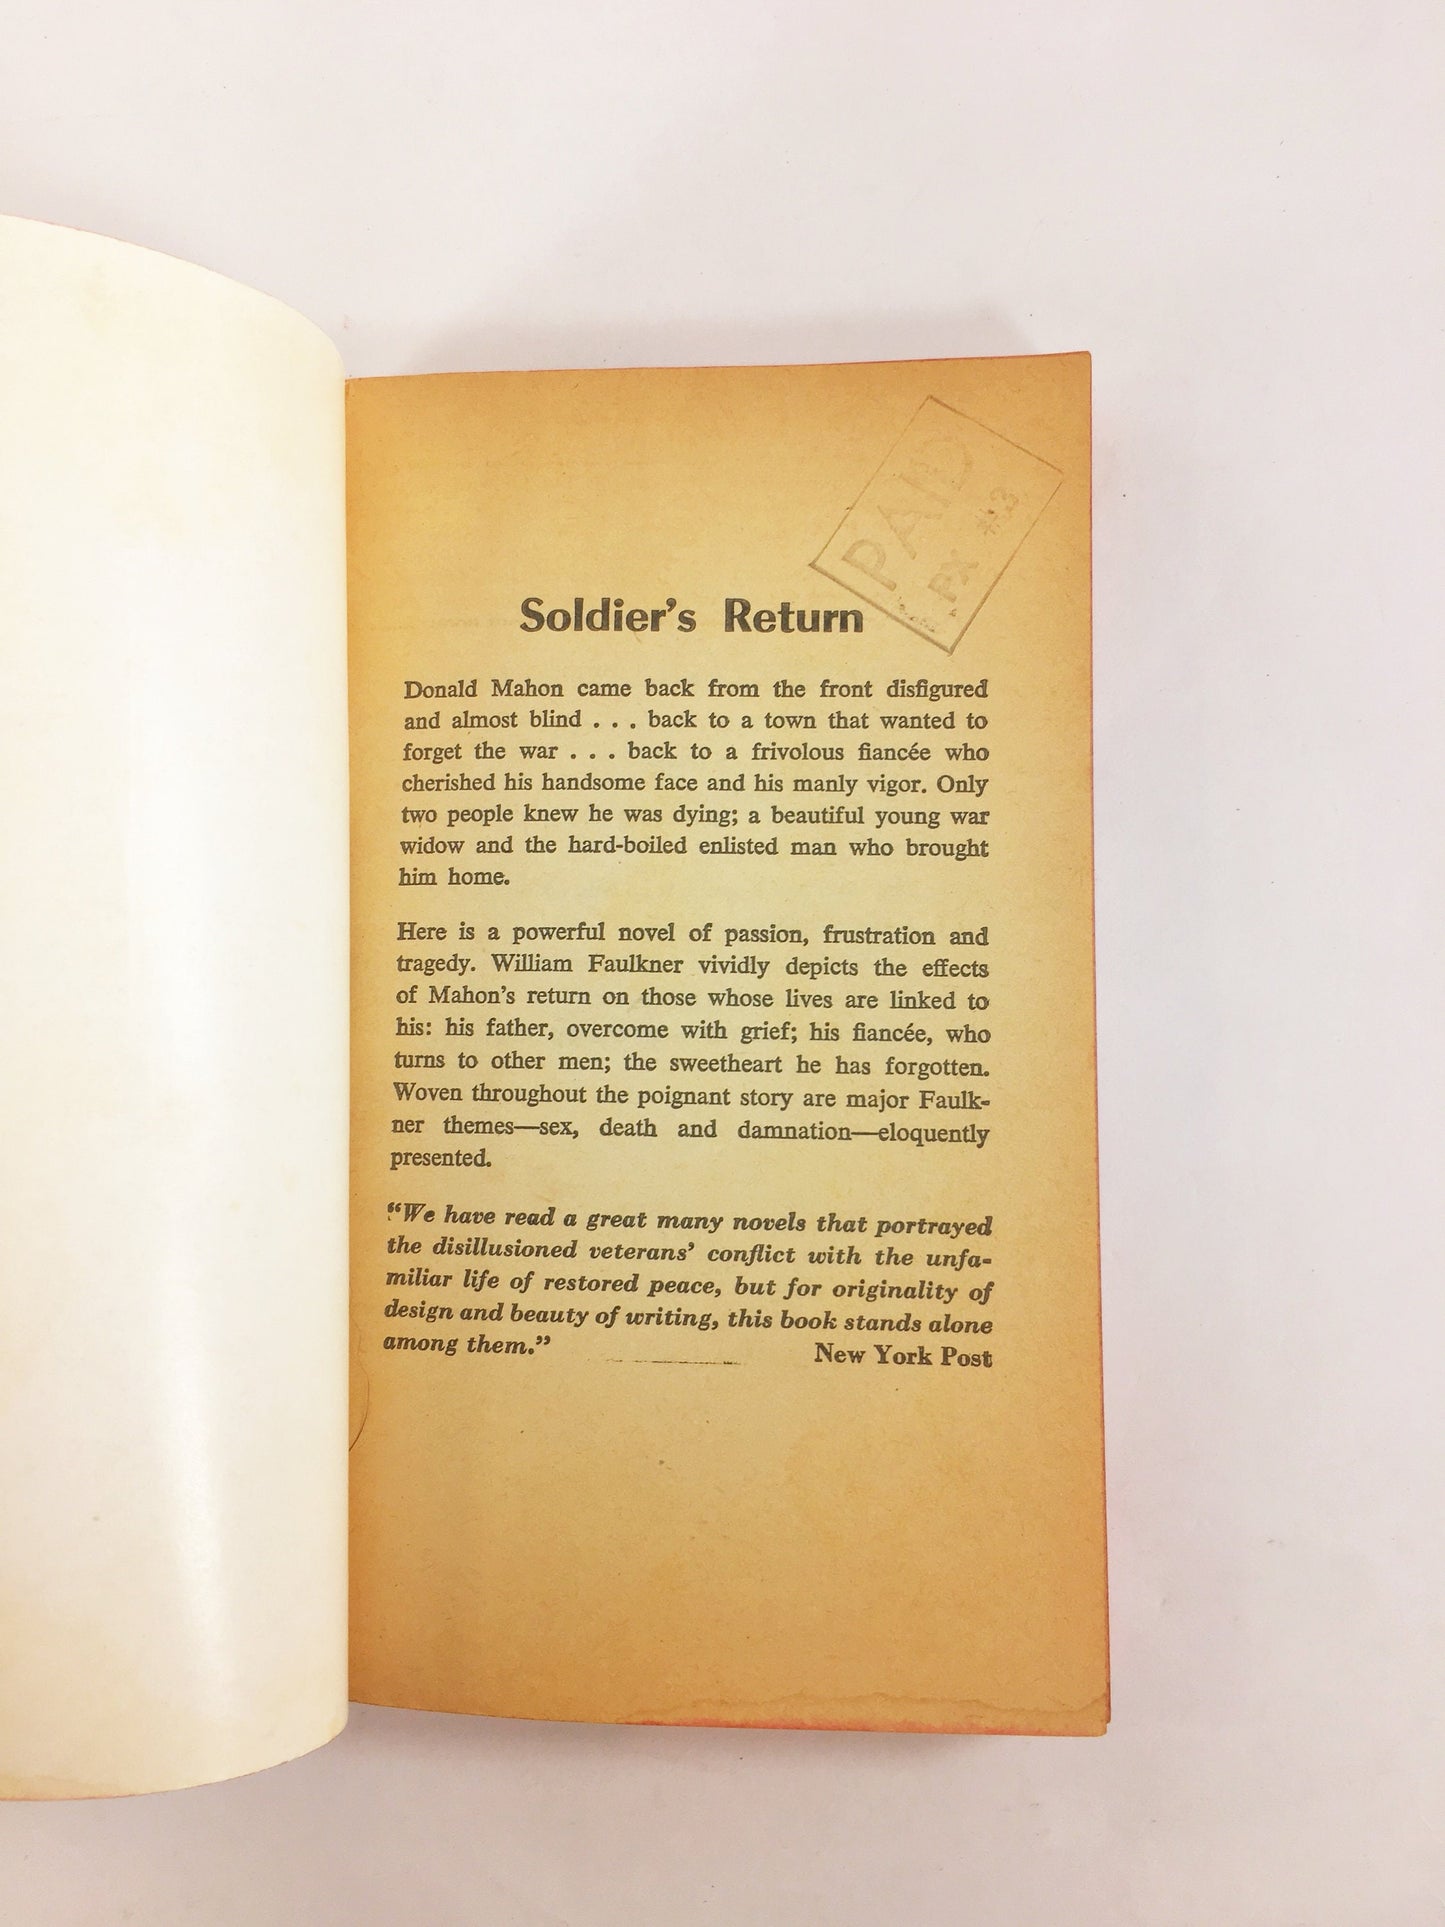 William Faulkner Soldiers' Pay. Vintage Signet paperback book circa 1961. Faulkner’s first novel deals powerfully with lives blighted by war